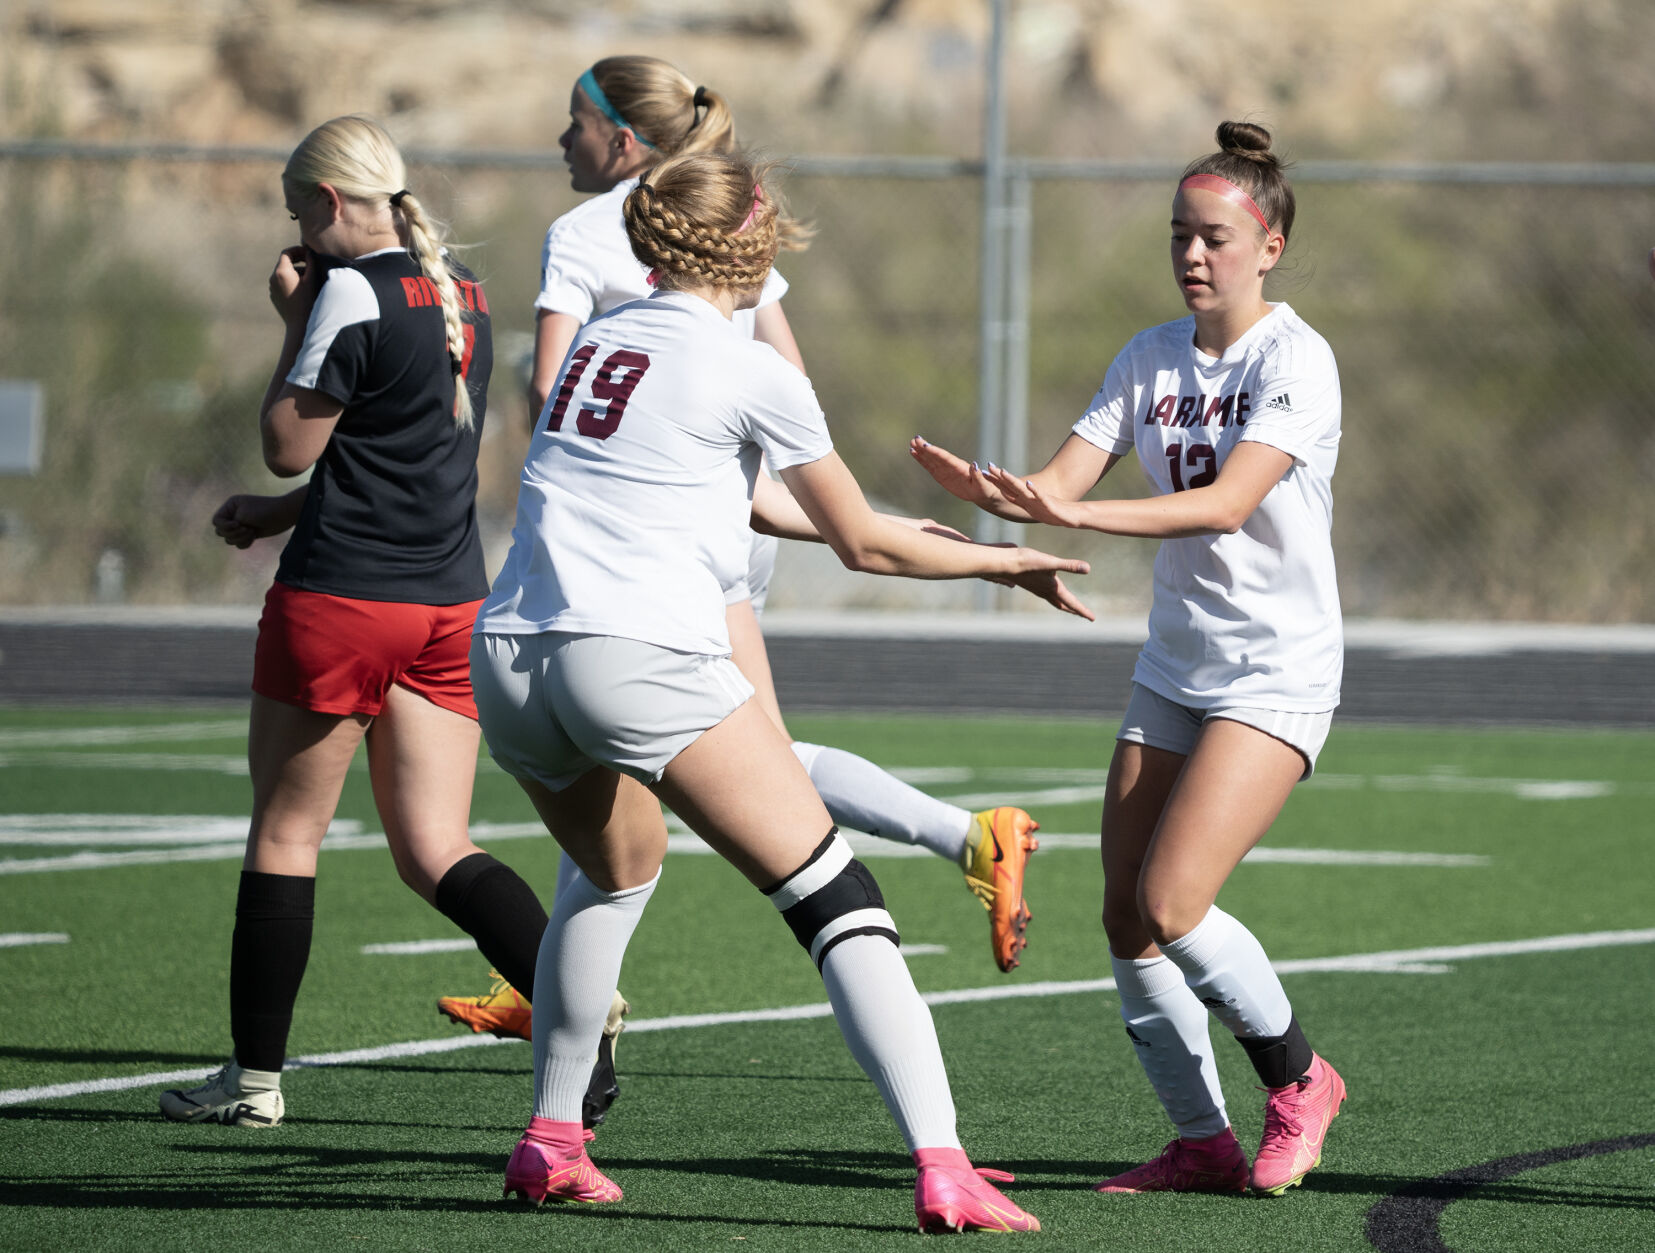 Laramie Soccer’s Romero Nets Hat Trick to Secure 3rd Place Victory